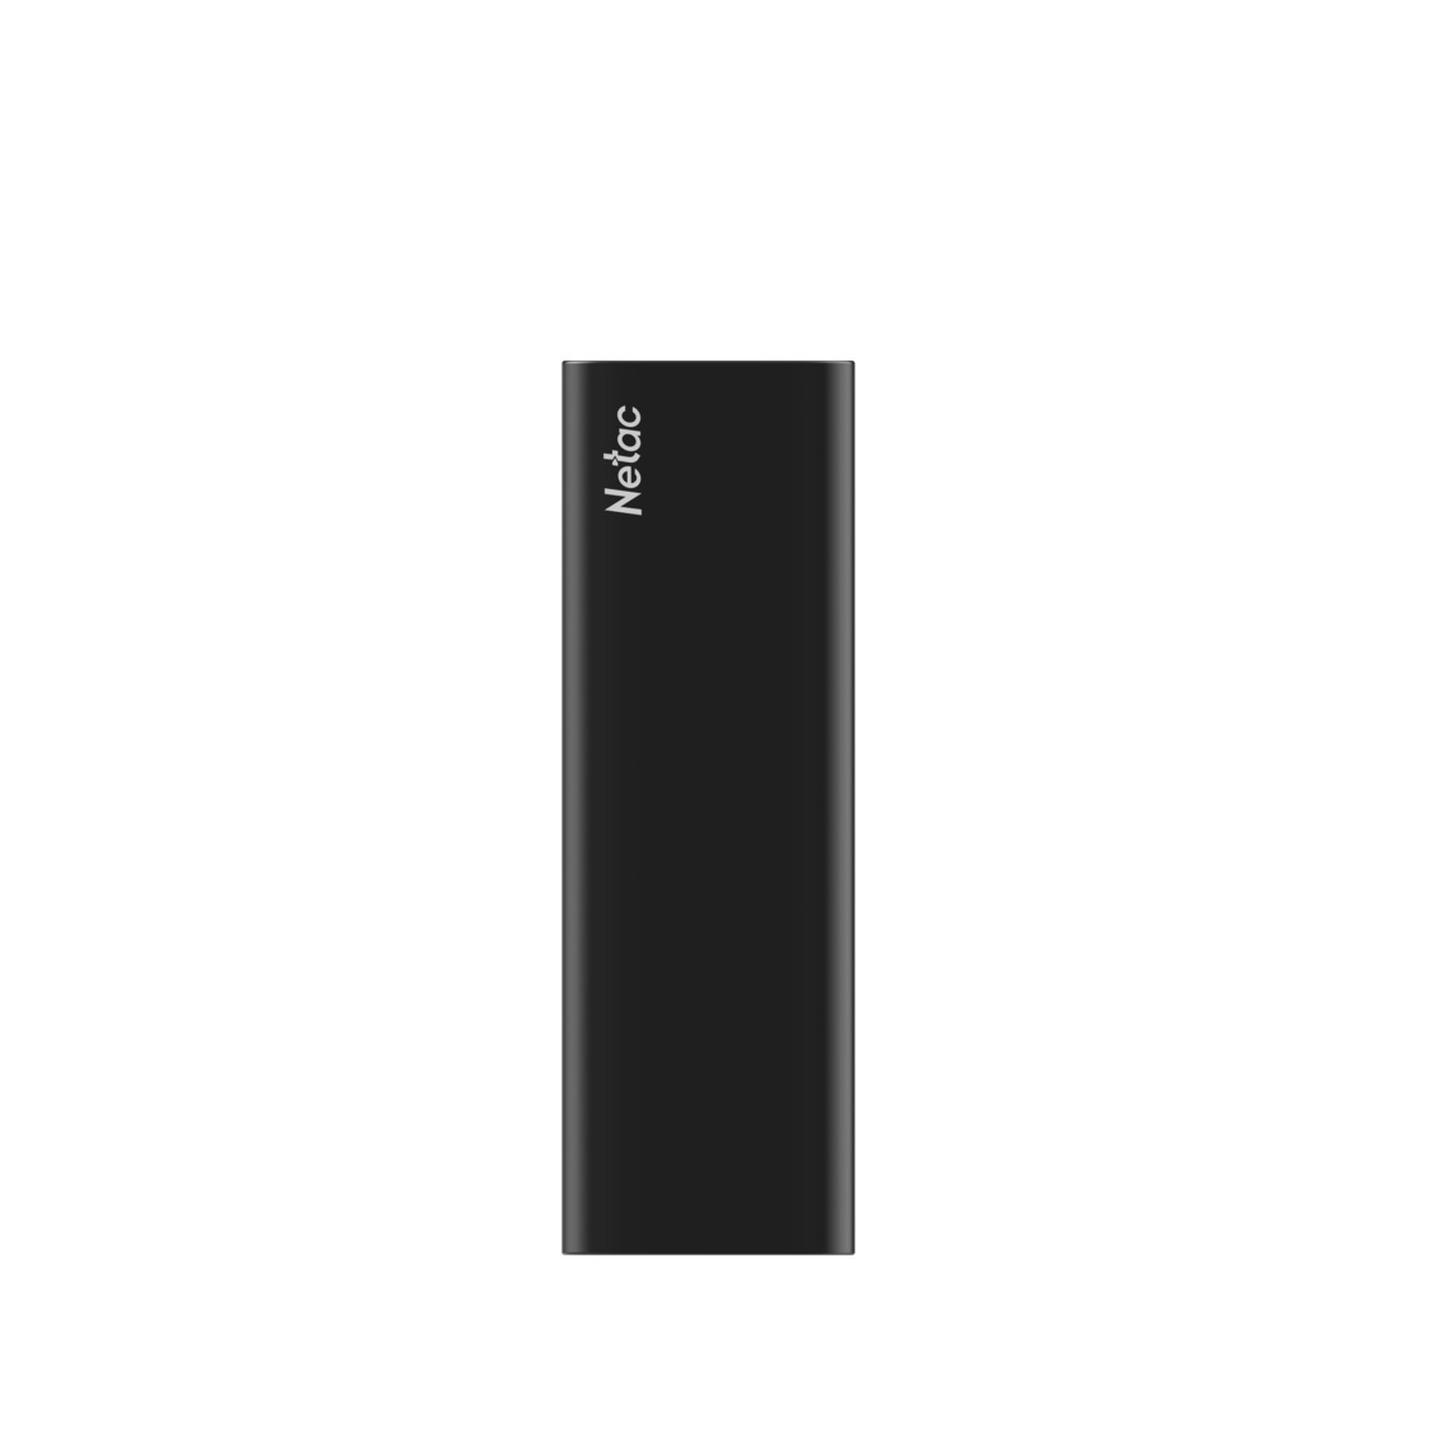 500GB Portable SSD with USB 3.2 Type-C Reads 539MB/s Writes 473MB/s